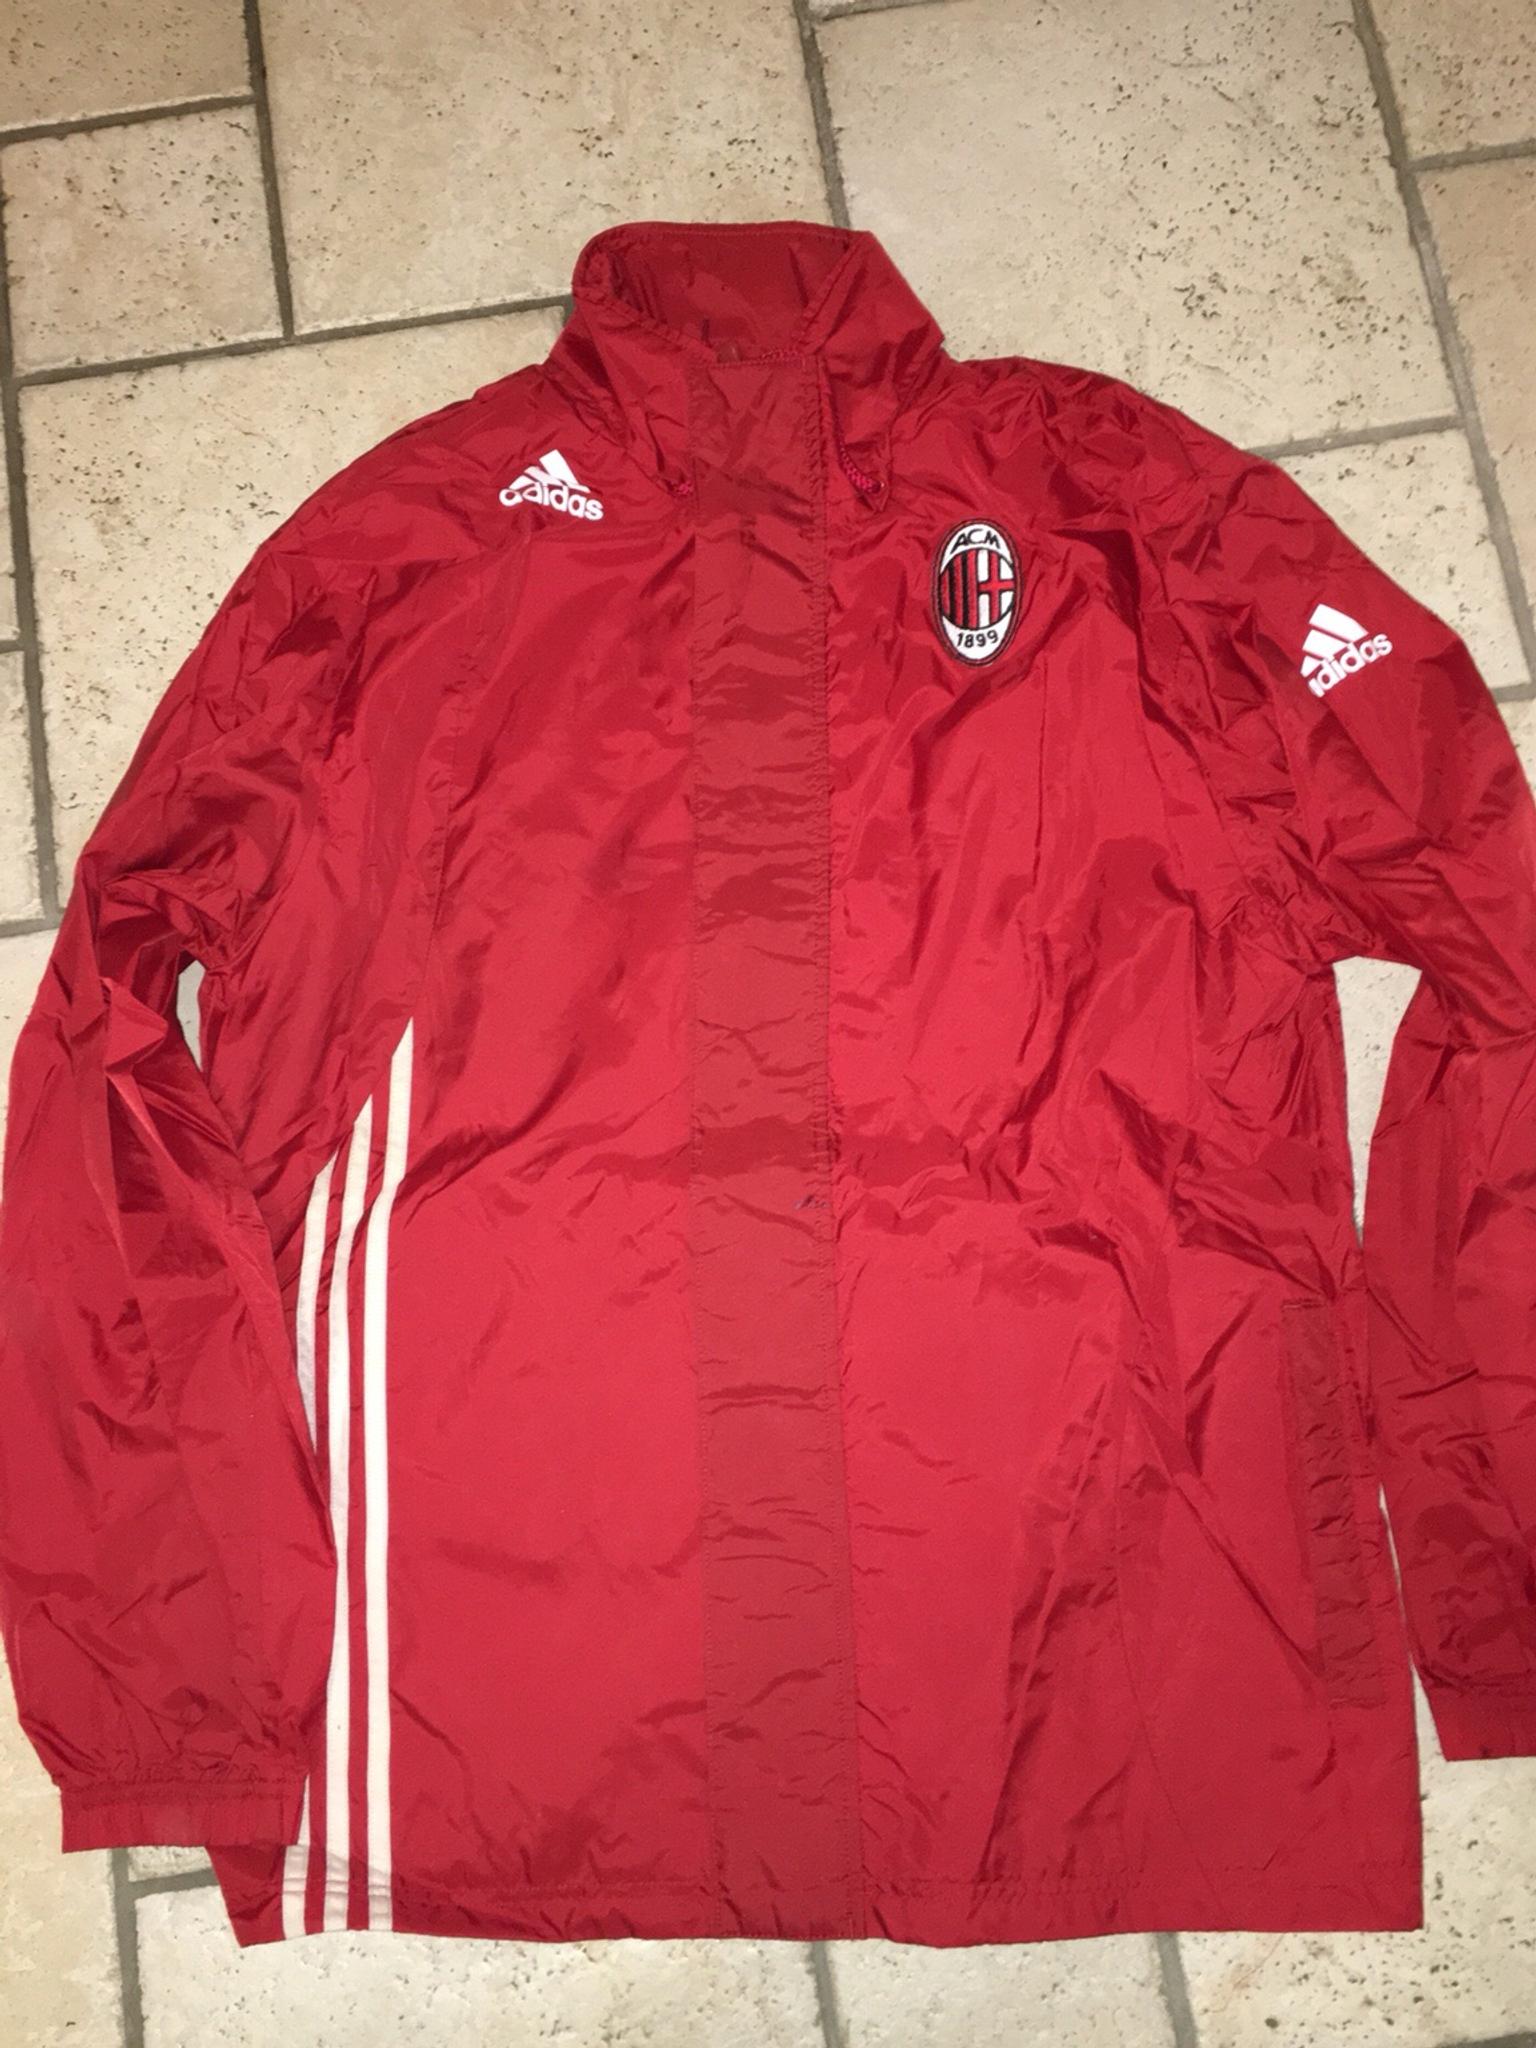 Kway Adidas AC Milan in 28066 Pernate for €9.00 for sale | Shpock